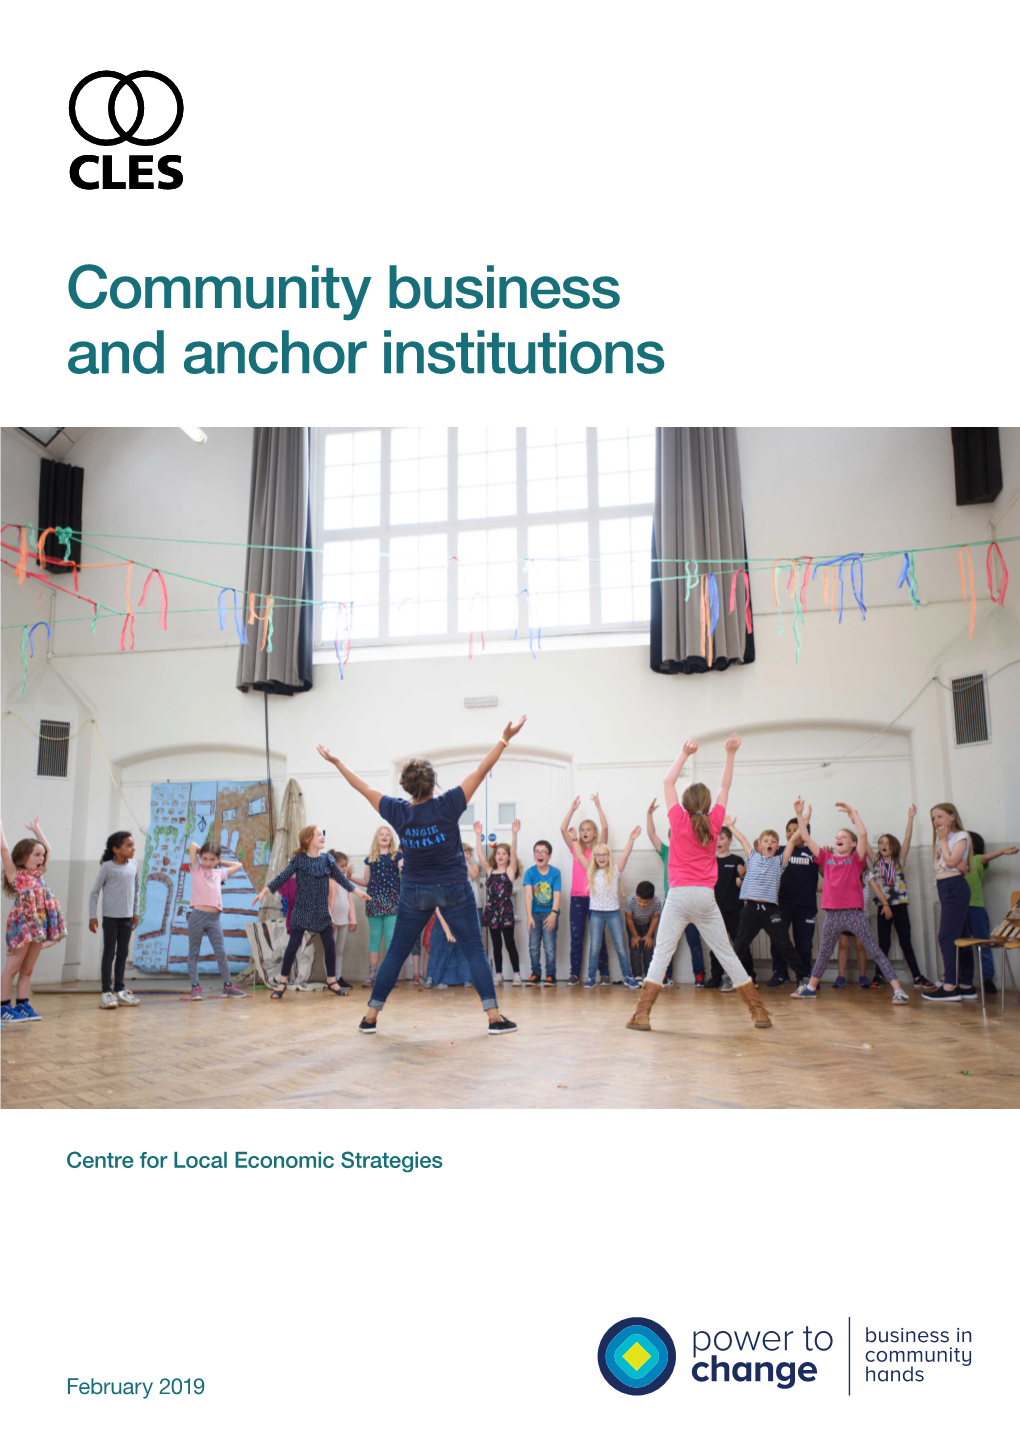 Community Business and Anchor Institutions